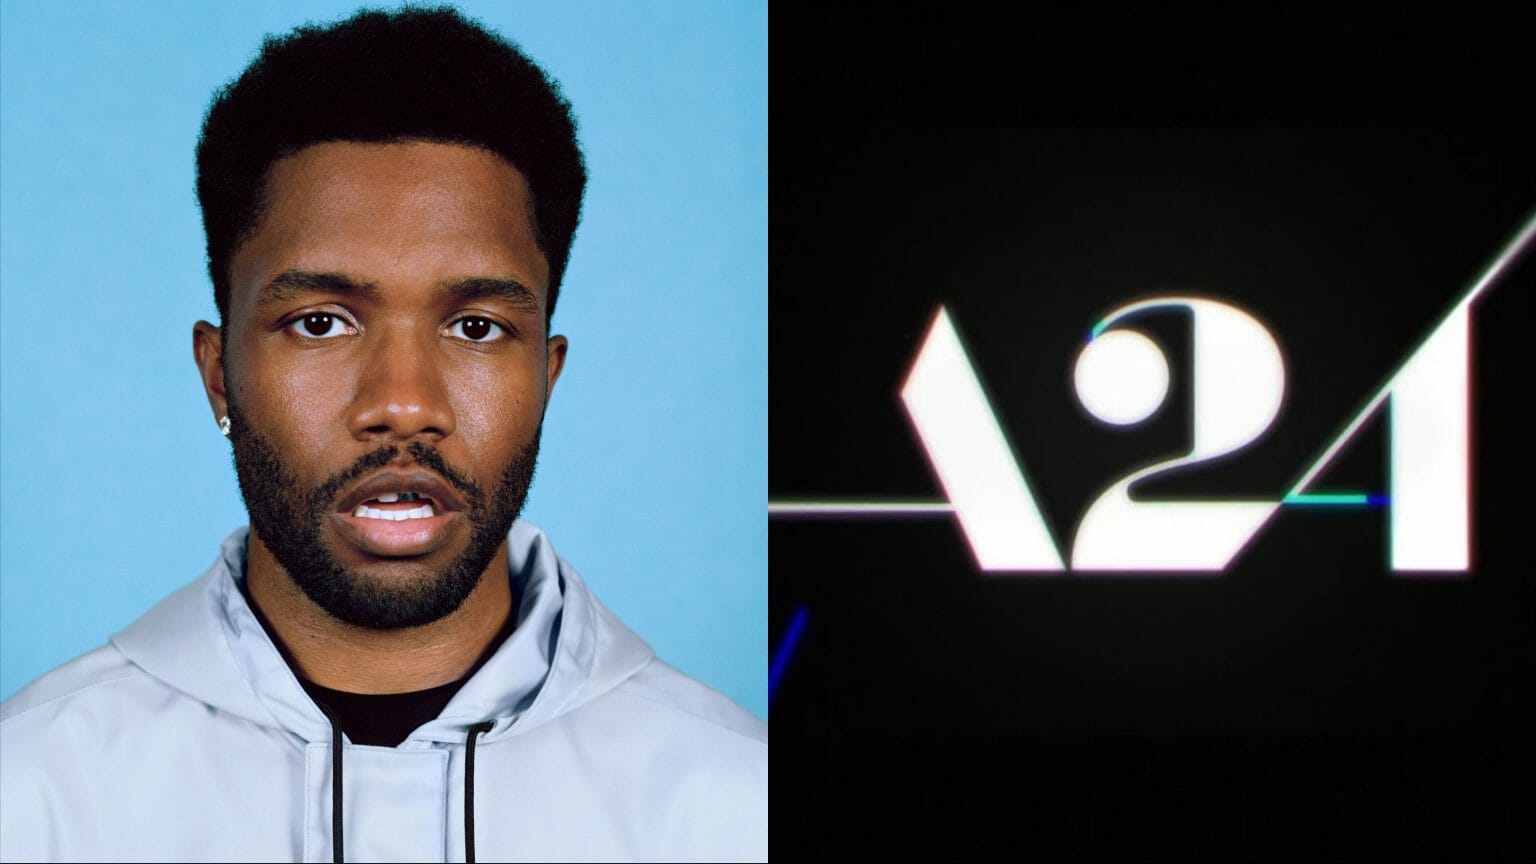 Grammy-winning artist Frank Ocean next to the official black and white A24 film studio logo.